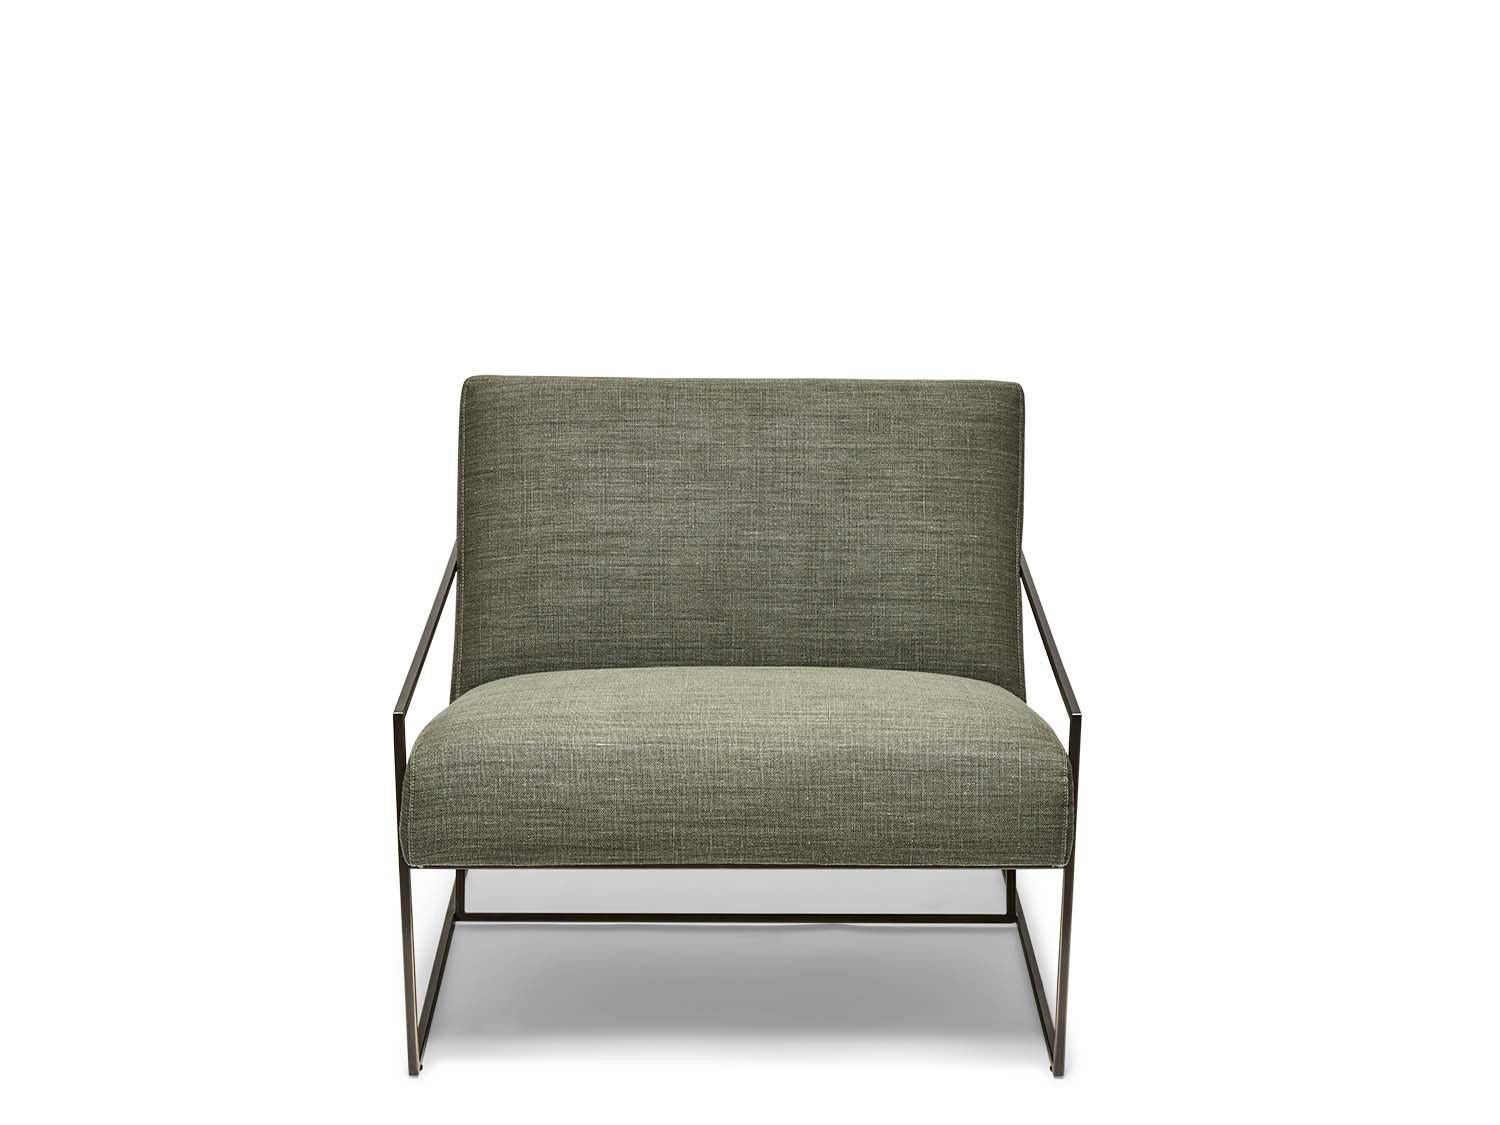 The Thin frame lounge chair is a modern lounge chair with a low-profile, thin metal frame that is available in an array of finishes and the option of diamond tufting. Shown here in antiqued brass

The Lawson-Fenning Collection is designed and